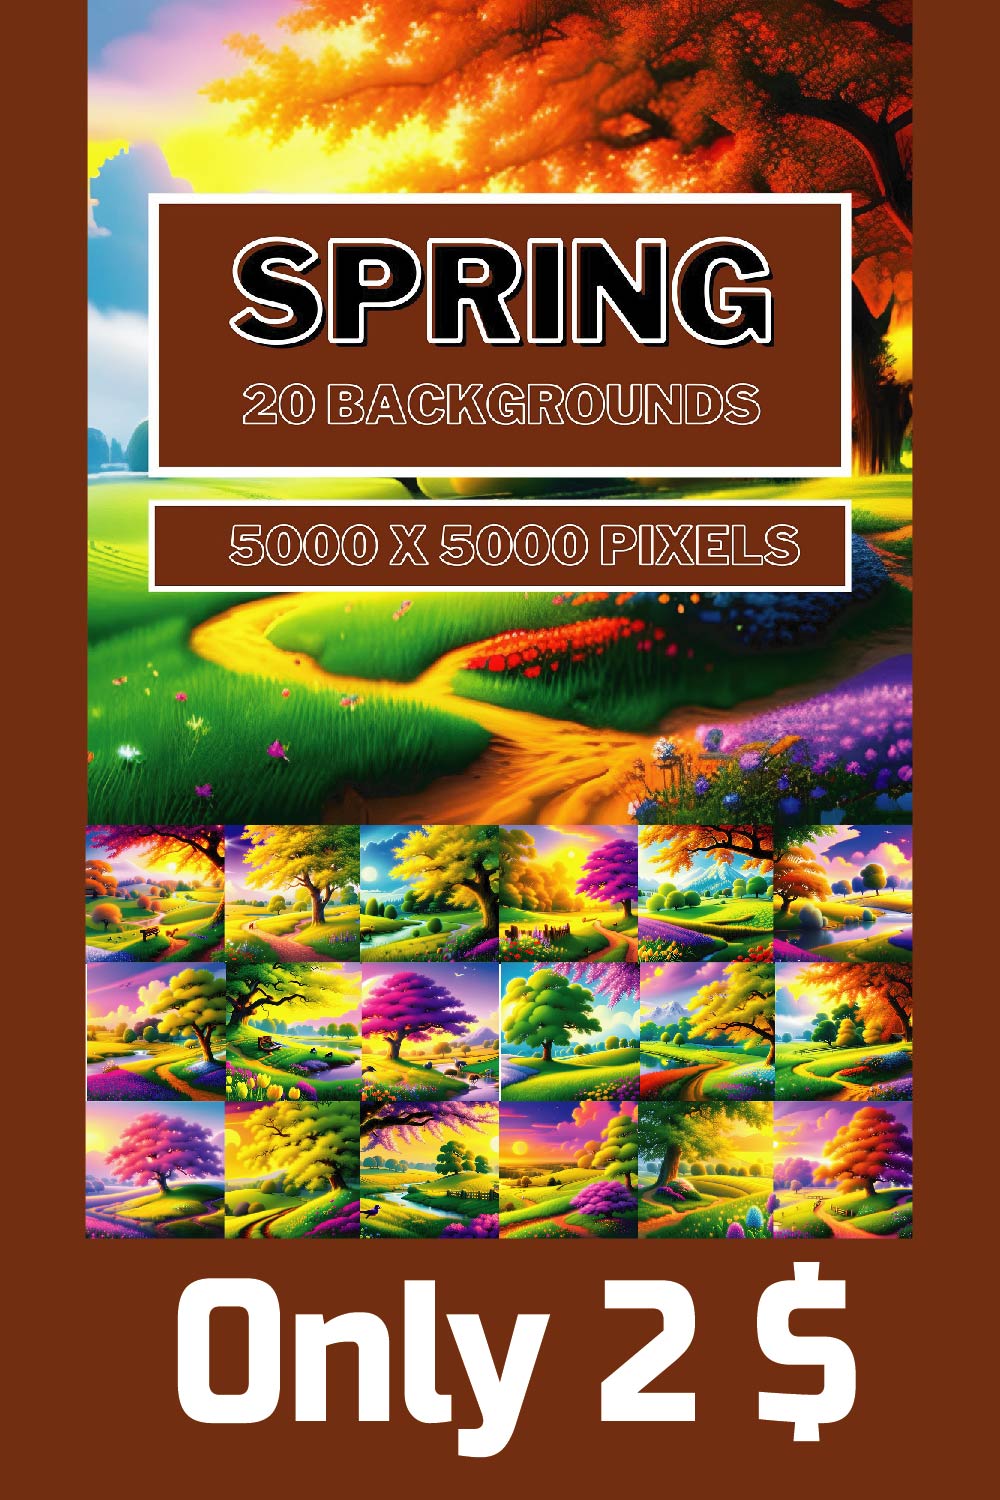 spring bundle with high quality 20 backgrounds pinterest preview image.